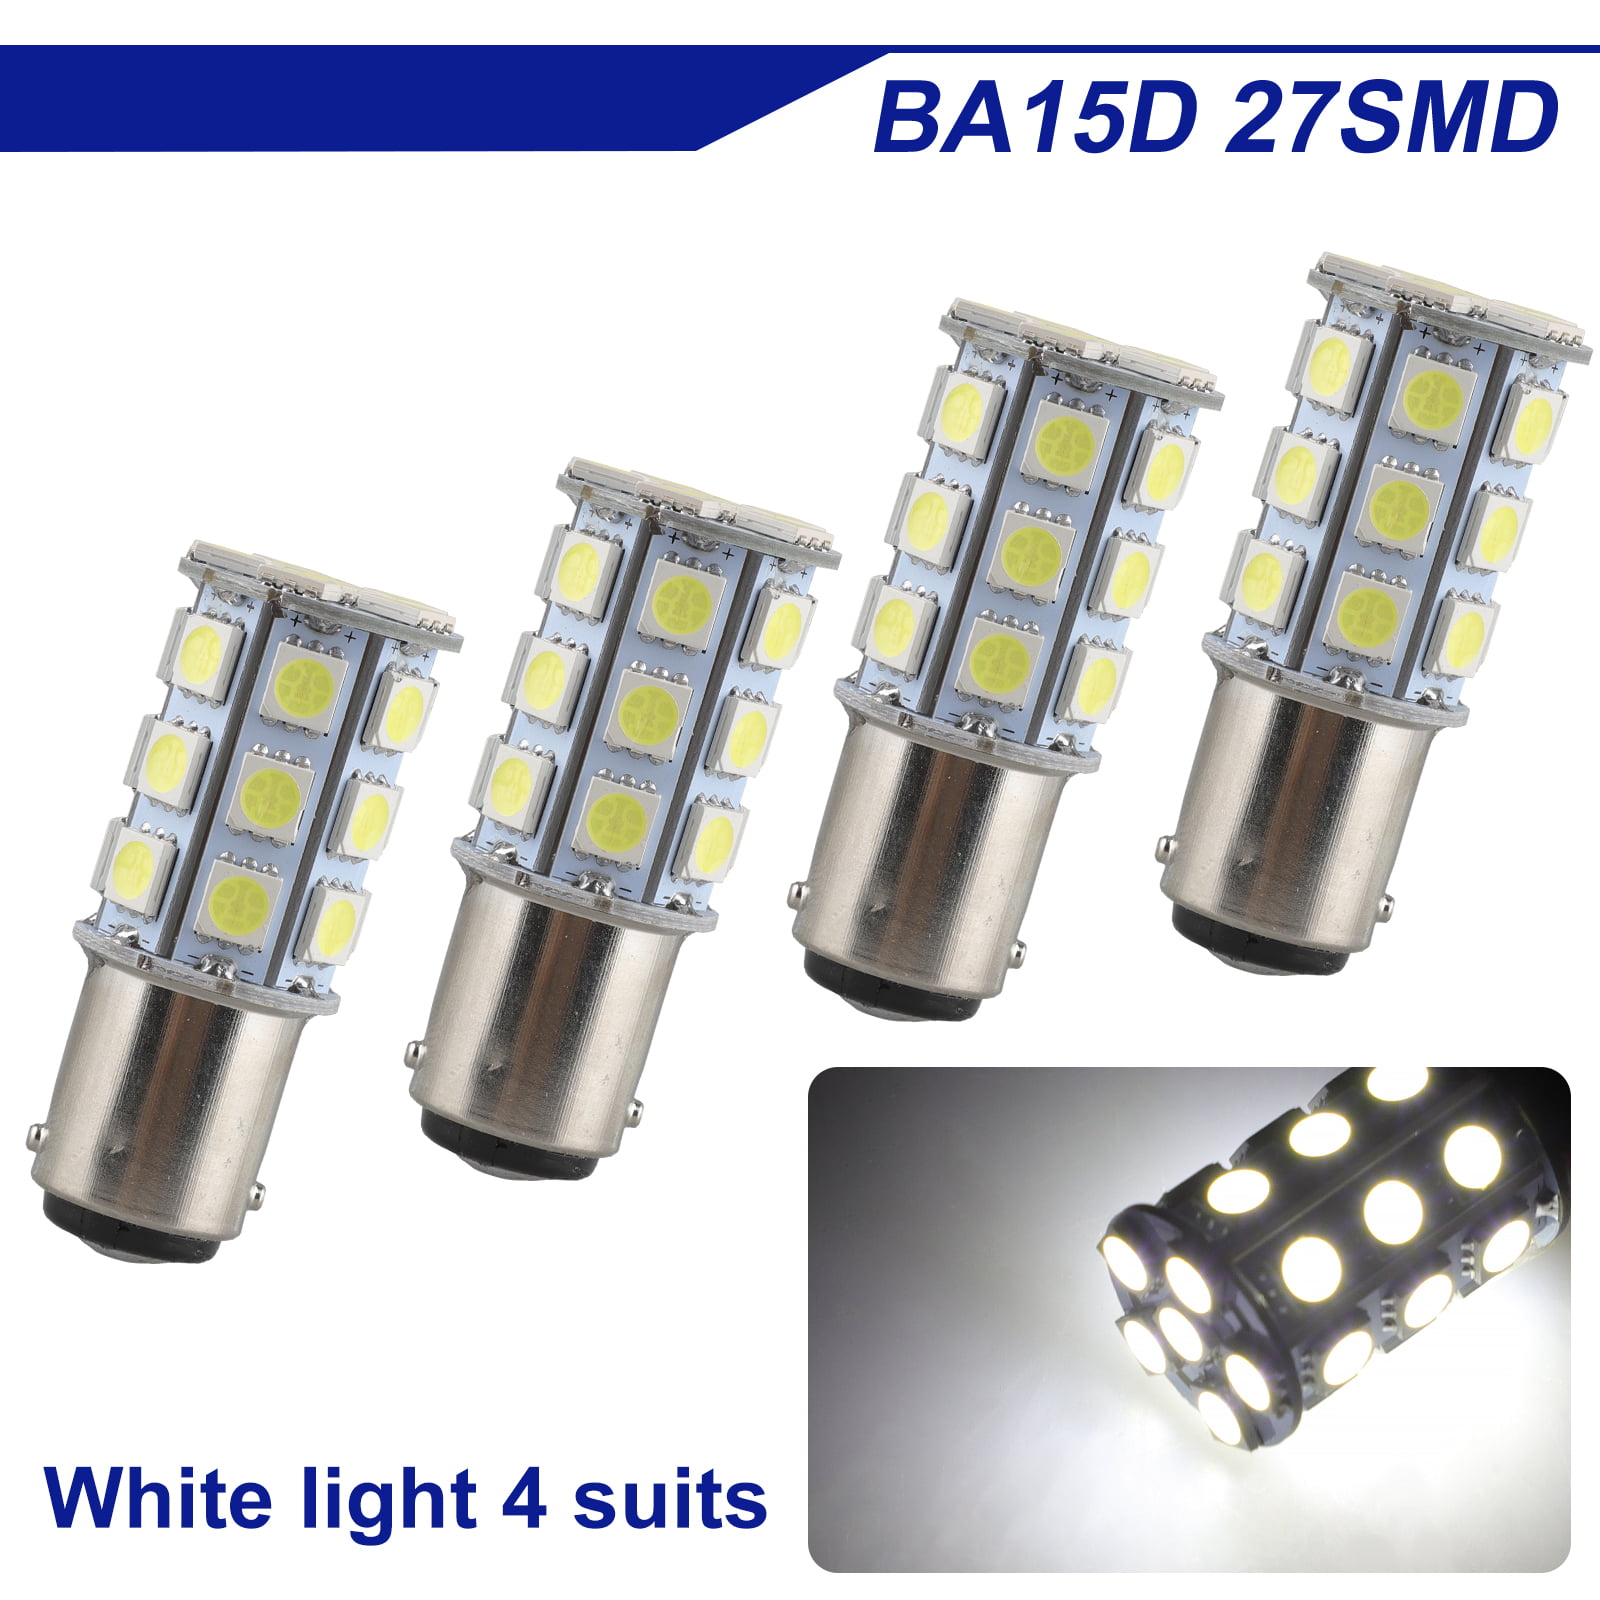 Pack of 8 1178 LED 5050 18-SMD White 1076 LED Bulb Replacement For 12V RV Interior Ceiling Dome Light/Travel Trailer/Boat Indoor/Camper Light Bulbs UNXMRFF Super Bright 1142 BA15D LED Bulbs 